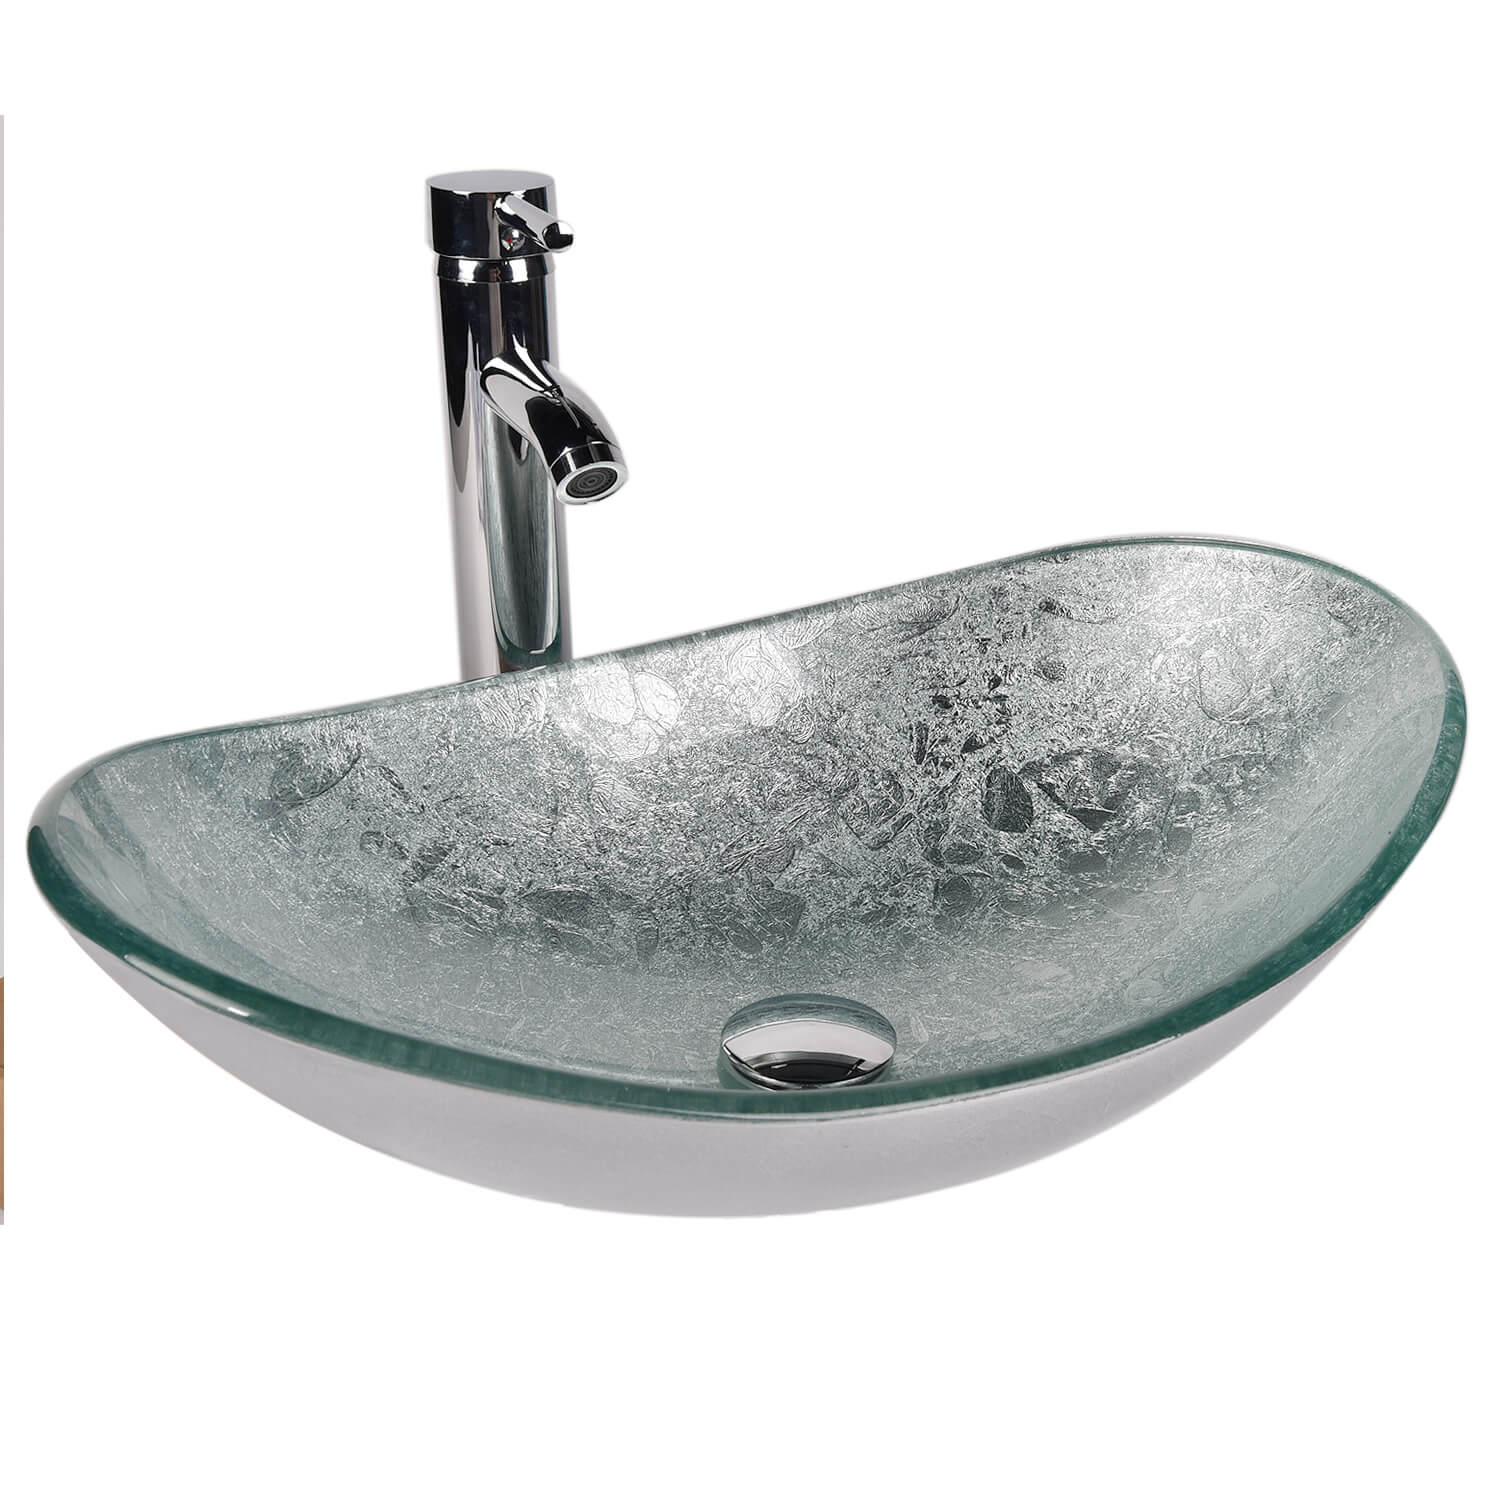 Bathroom Artistic Glass Vessel Sink With Faucet (Boat Shape) side view